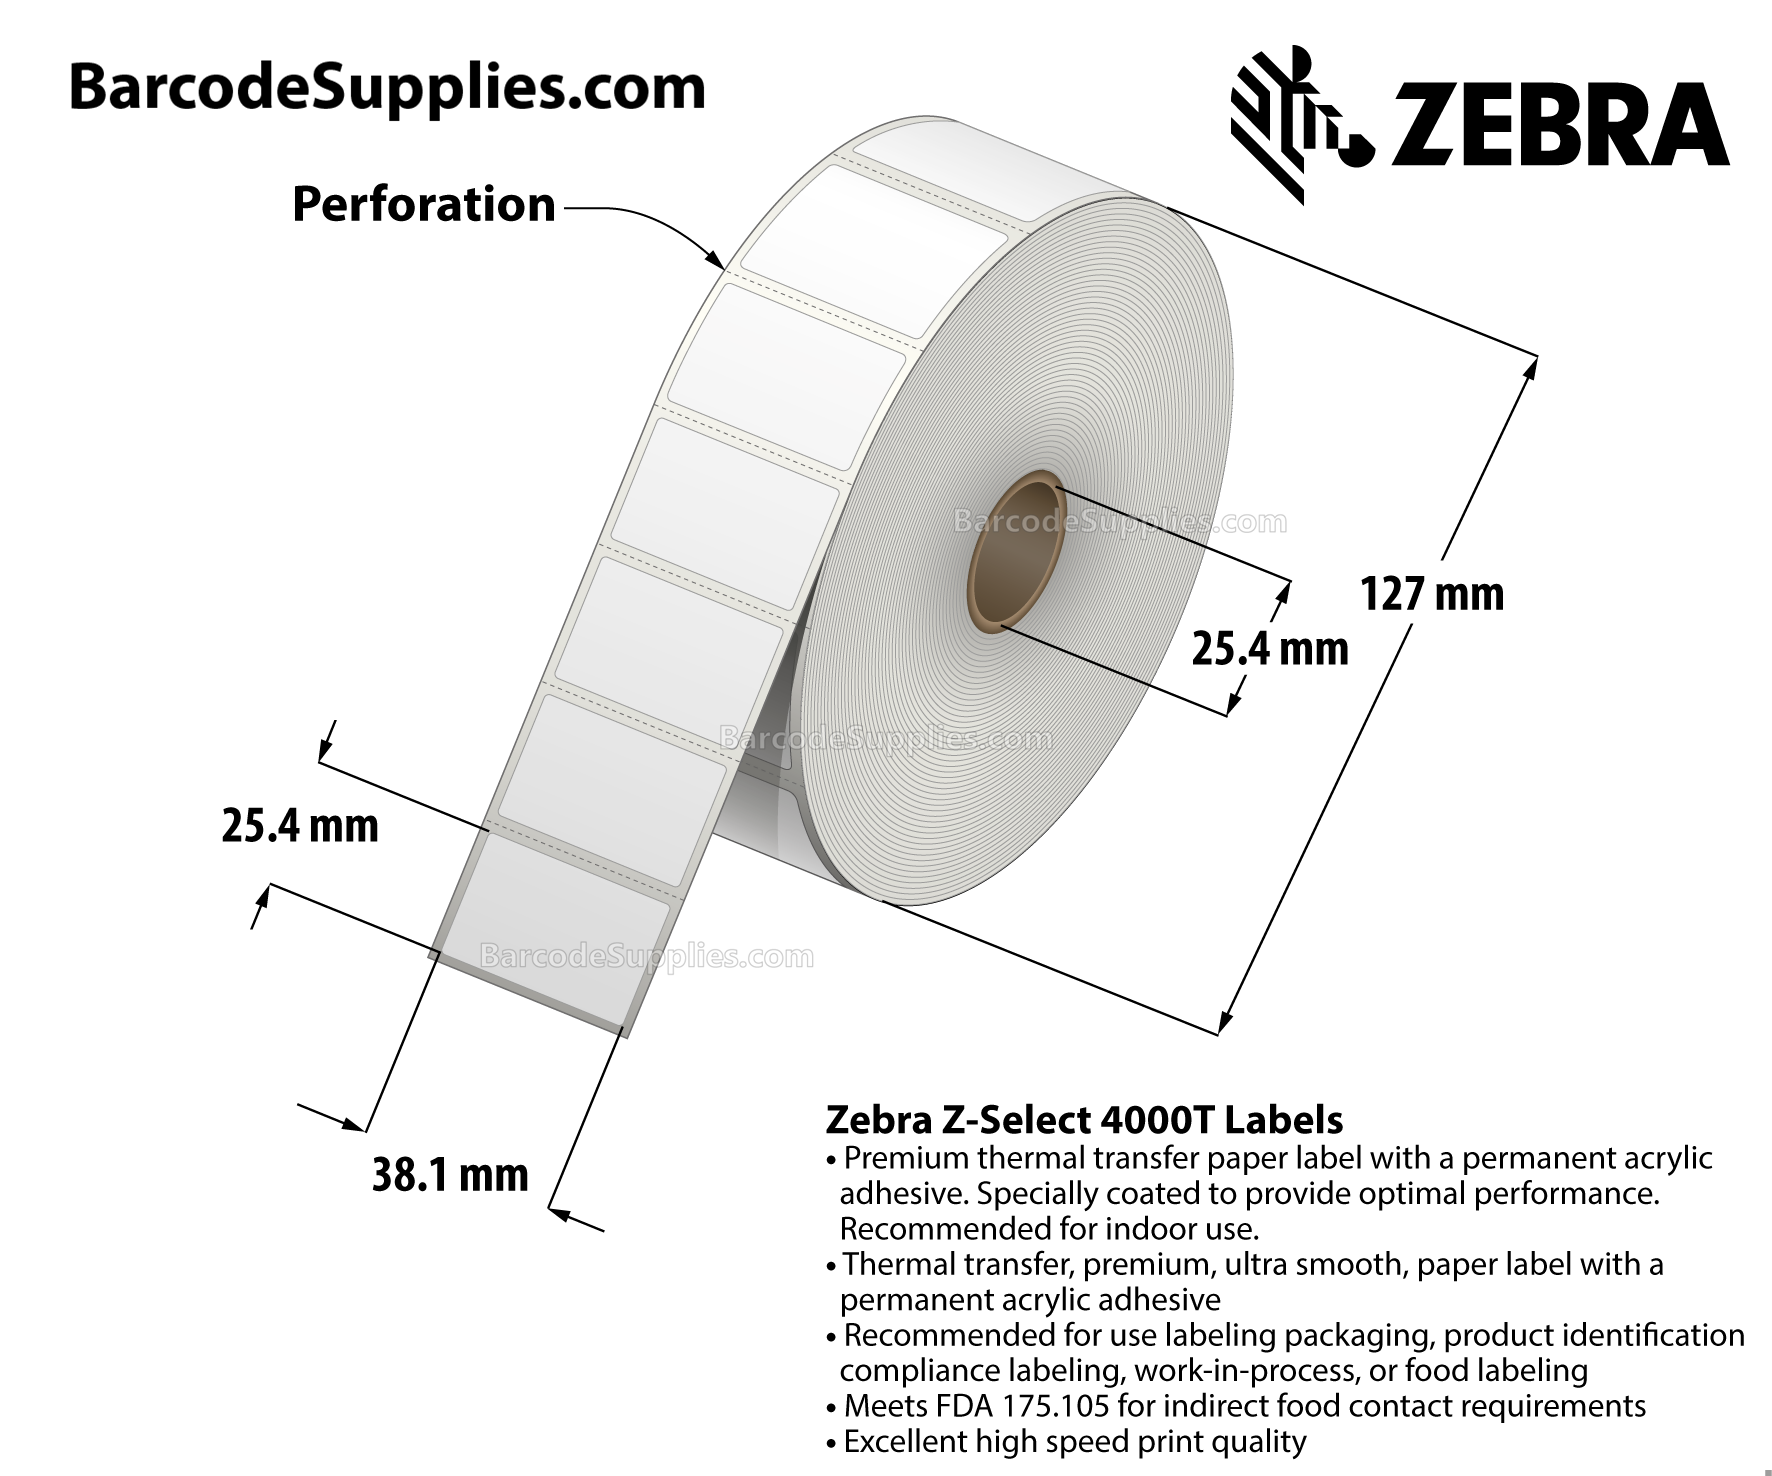 1.5 x 1 Thermal Transfer White Z-Select 4000T Labels With Permanent Adhesive - Perforated - 2260 Labels Per Roll - Carton Of 8 Rolls - 18080 Labels Total - MPN: 83258